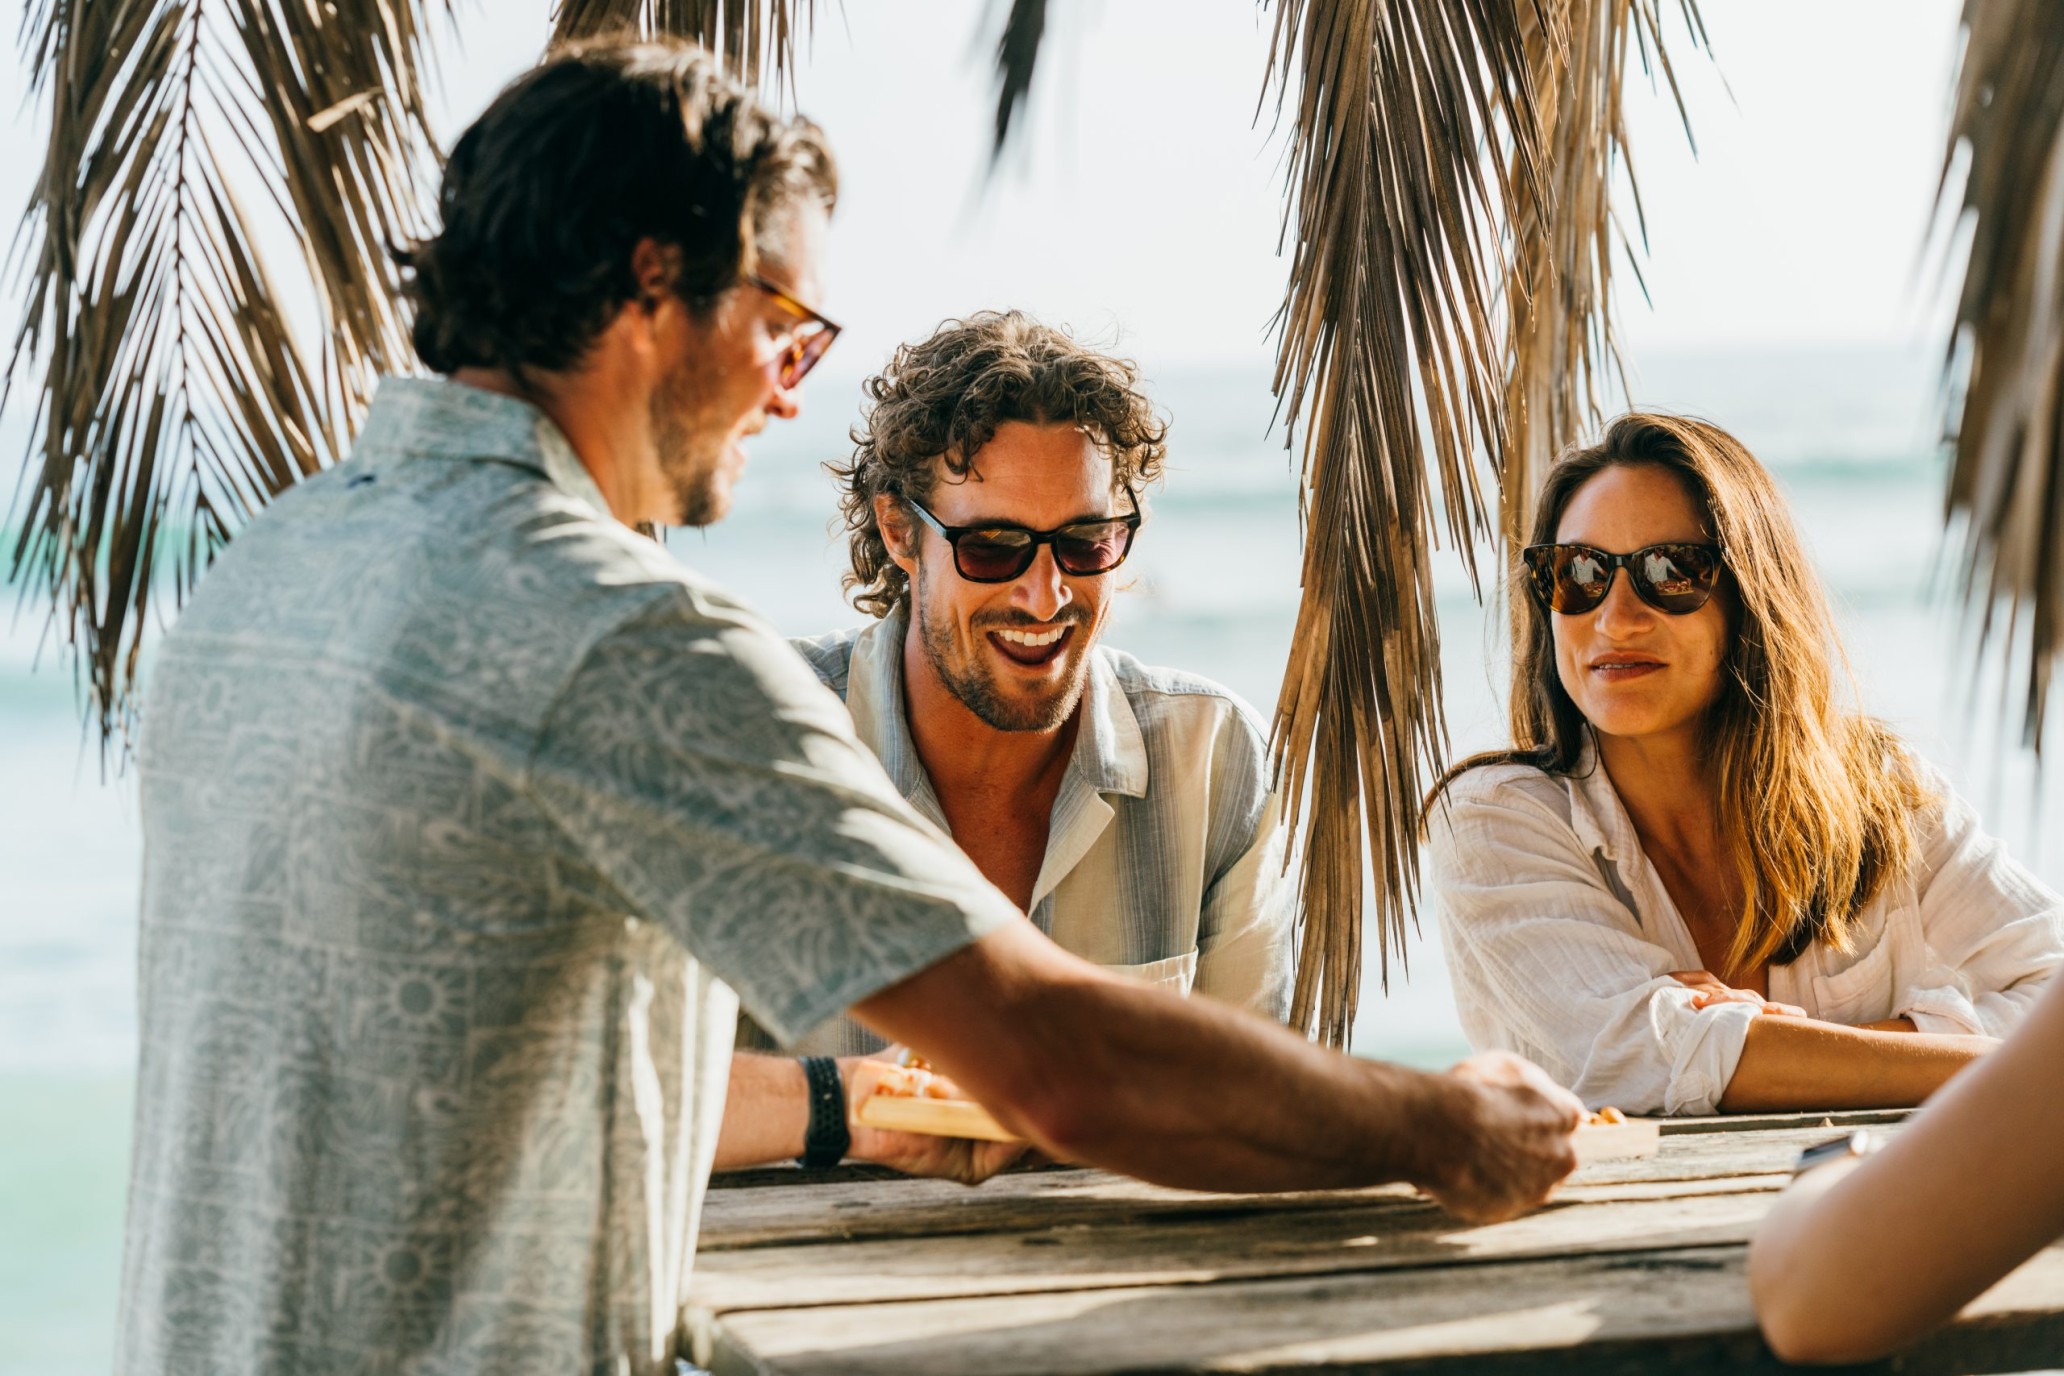 Costa Sunglasses continues to grow its lifestyle offering with two